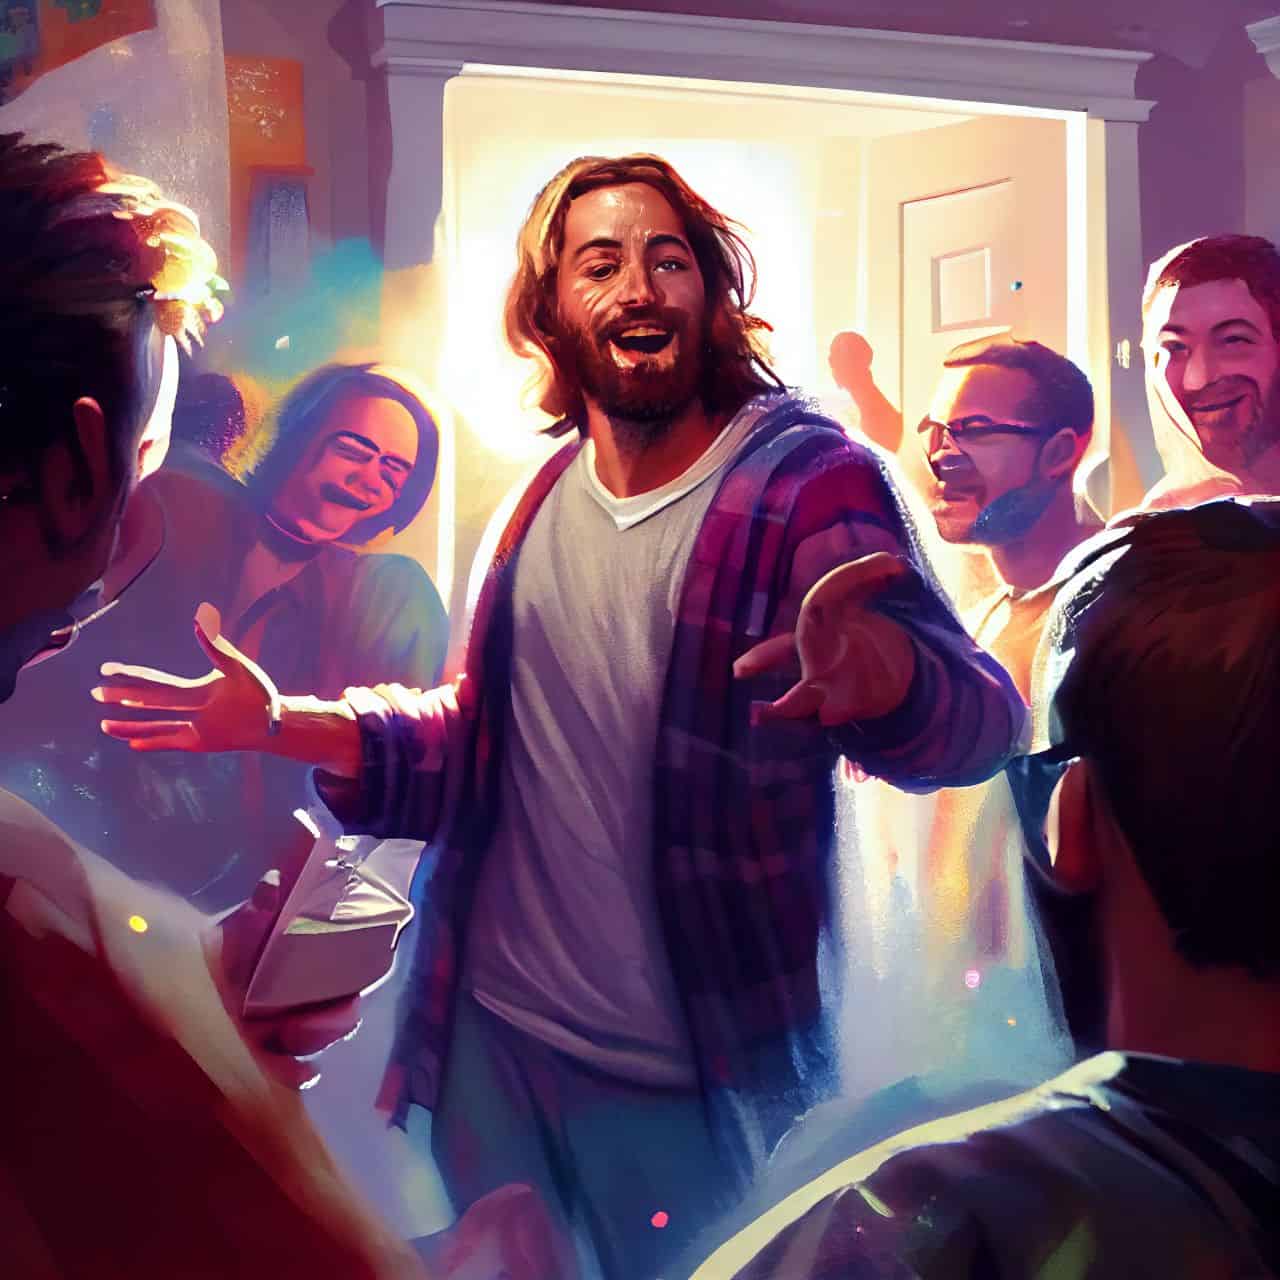 jesus as the life of the party